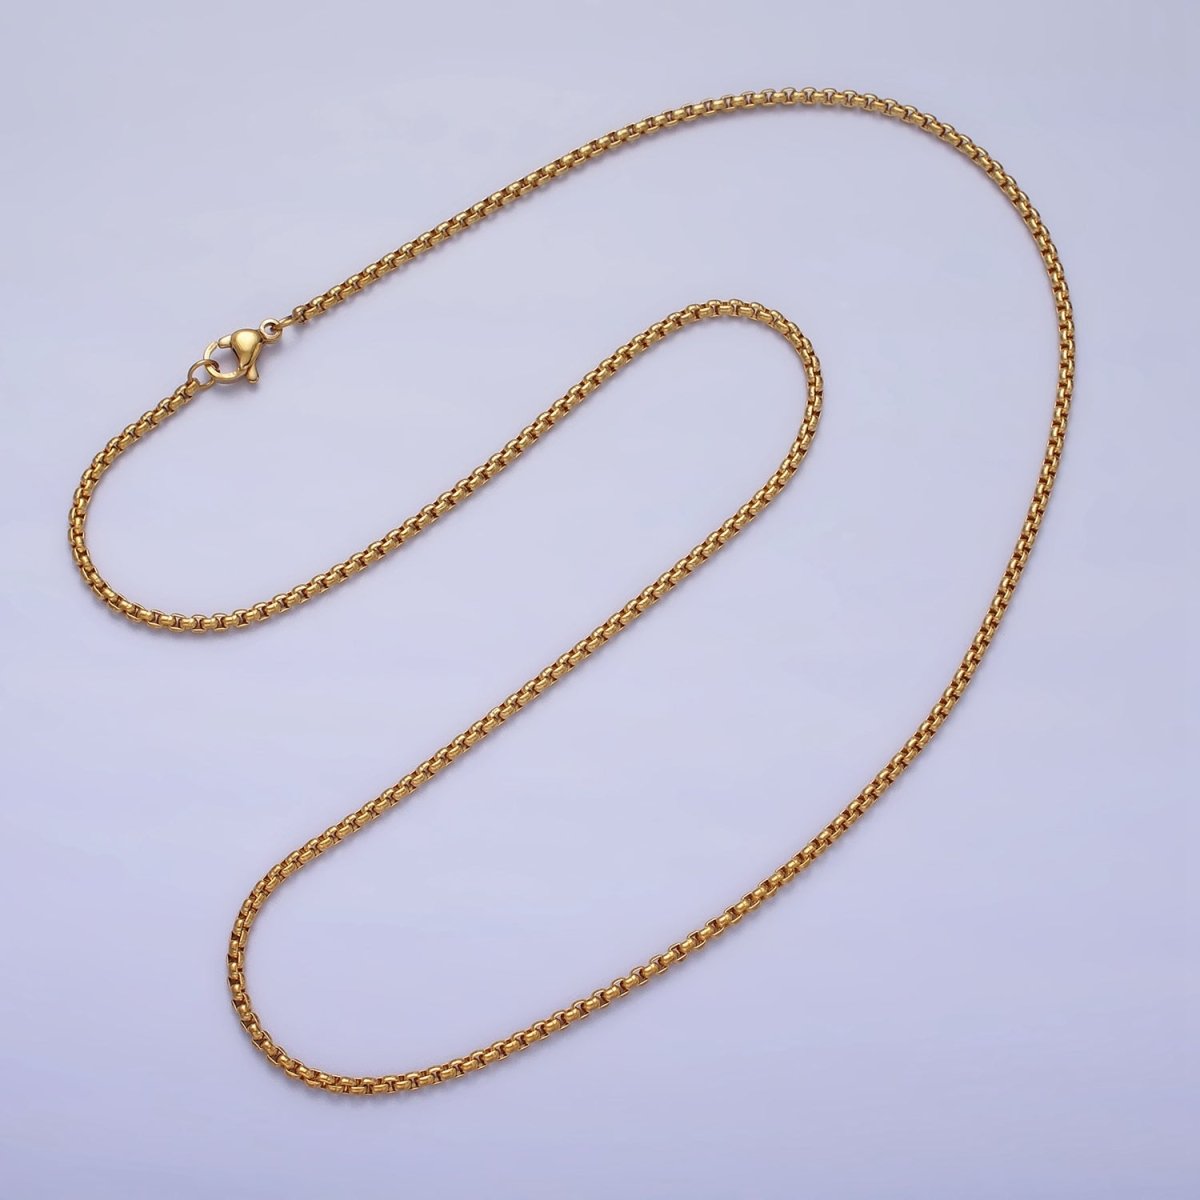 Cable Rolo Chain Necklace for Men or Women, Stainless Steel Box Chain 2mm Gold Silver Tone Tarnish Free Necklace Chain | WA-1706 WA-1707 Clearance Pricing - DLUXCA